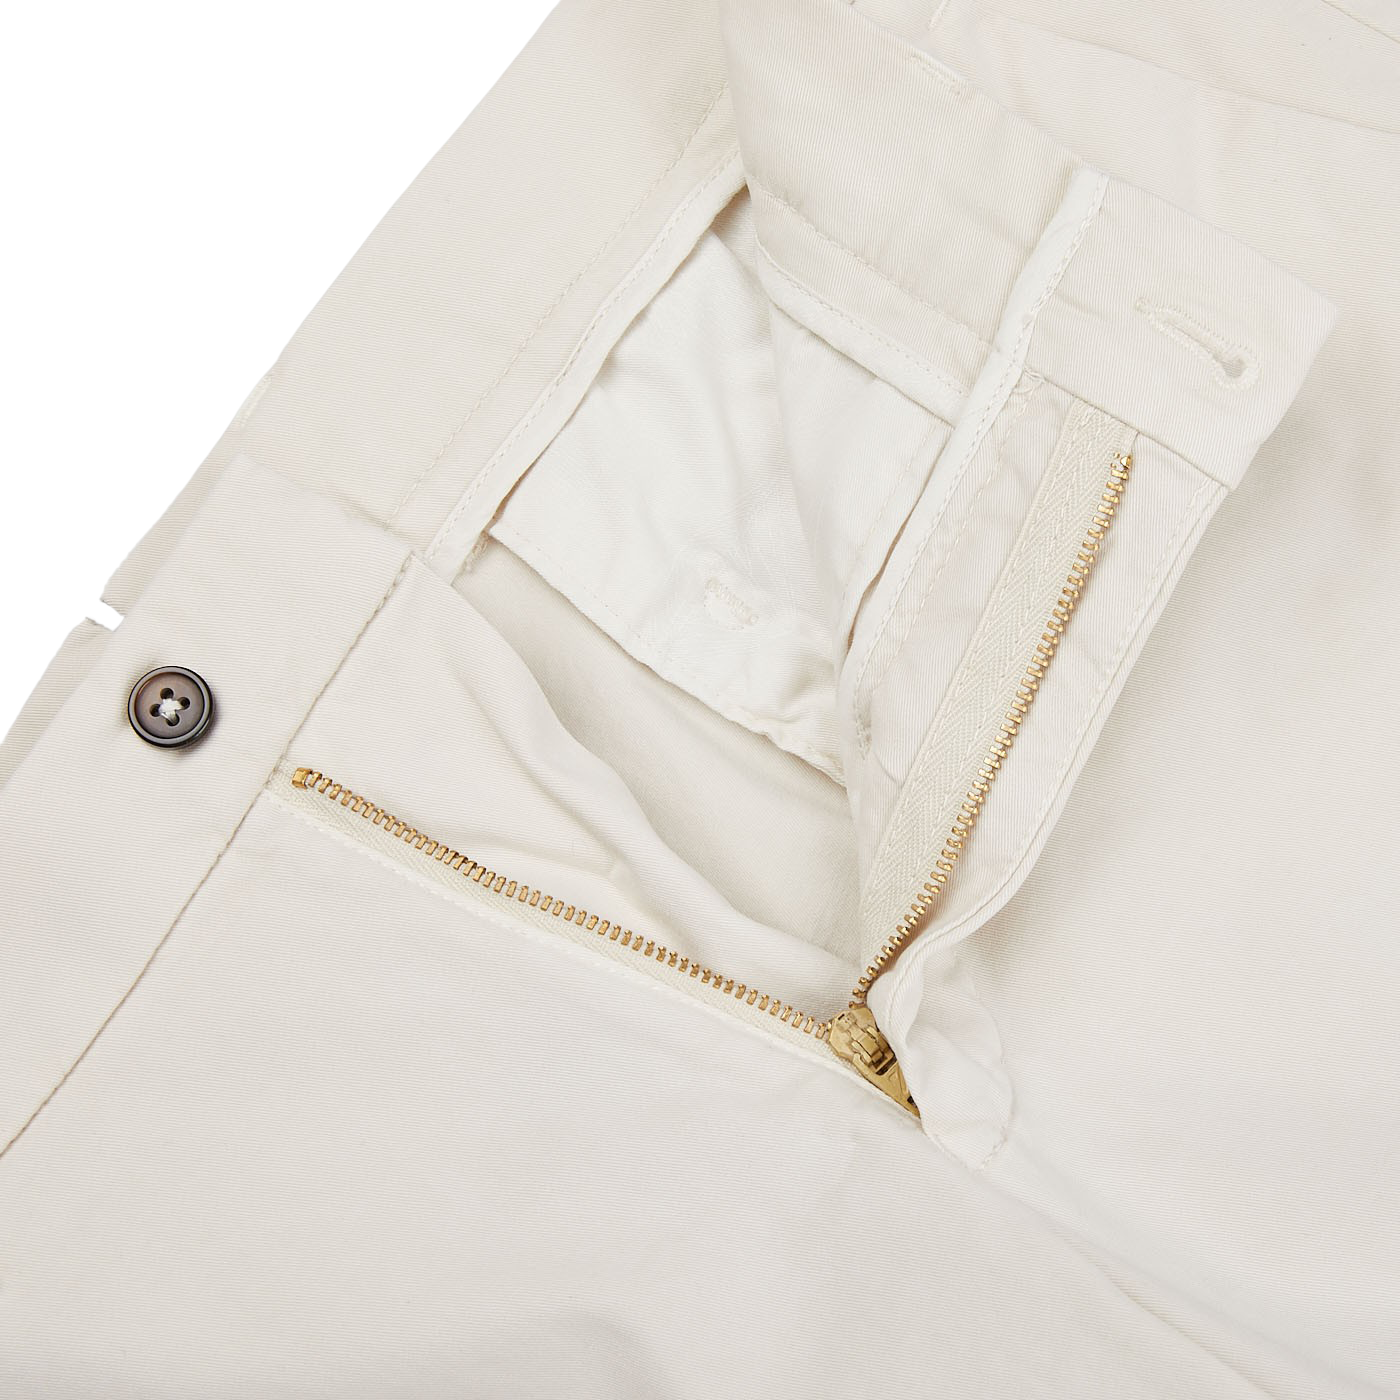 A pair of Berwich Light Beige Cotton Stretch Chinos with gold zippers.